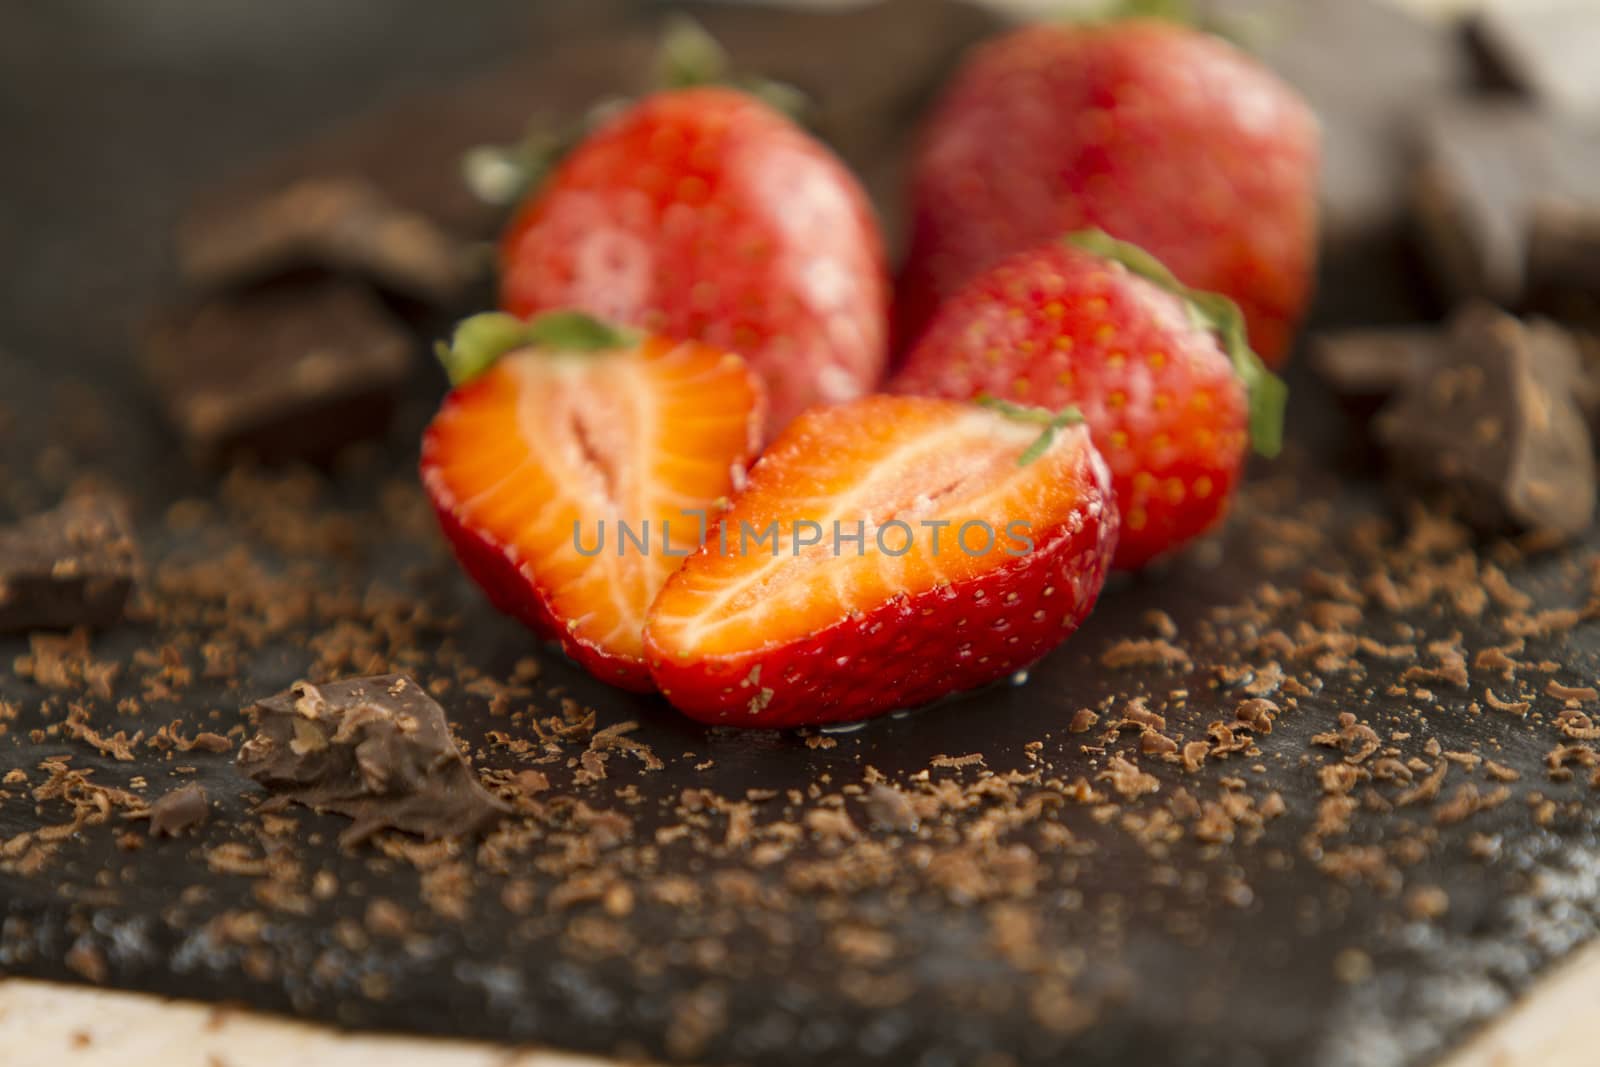 Neatly placed strawberries on a slate plate with chopped chocolate and grated around on a light wooden background and selective focus